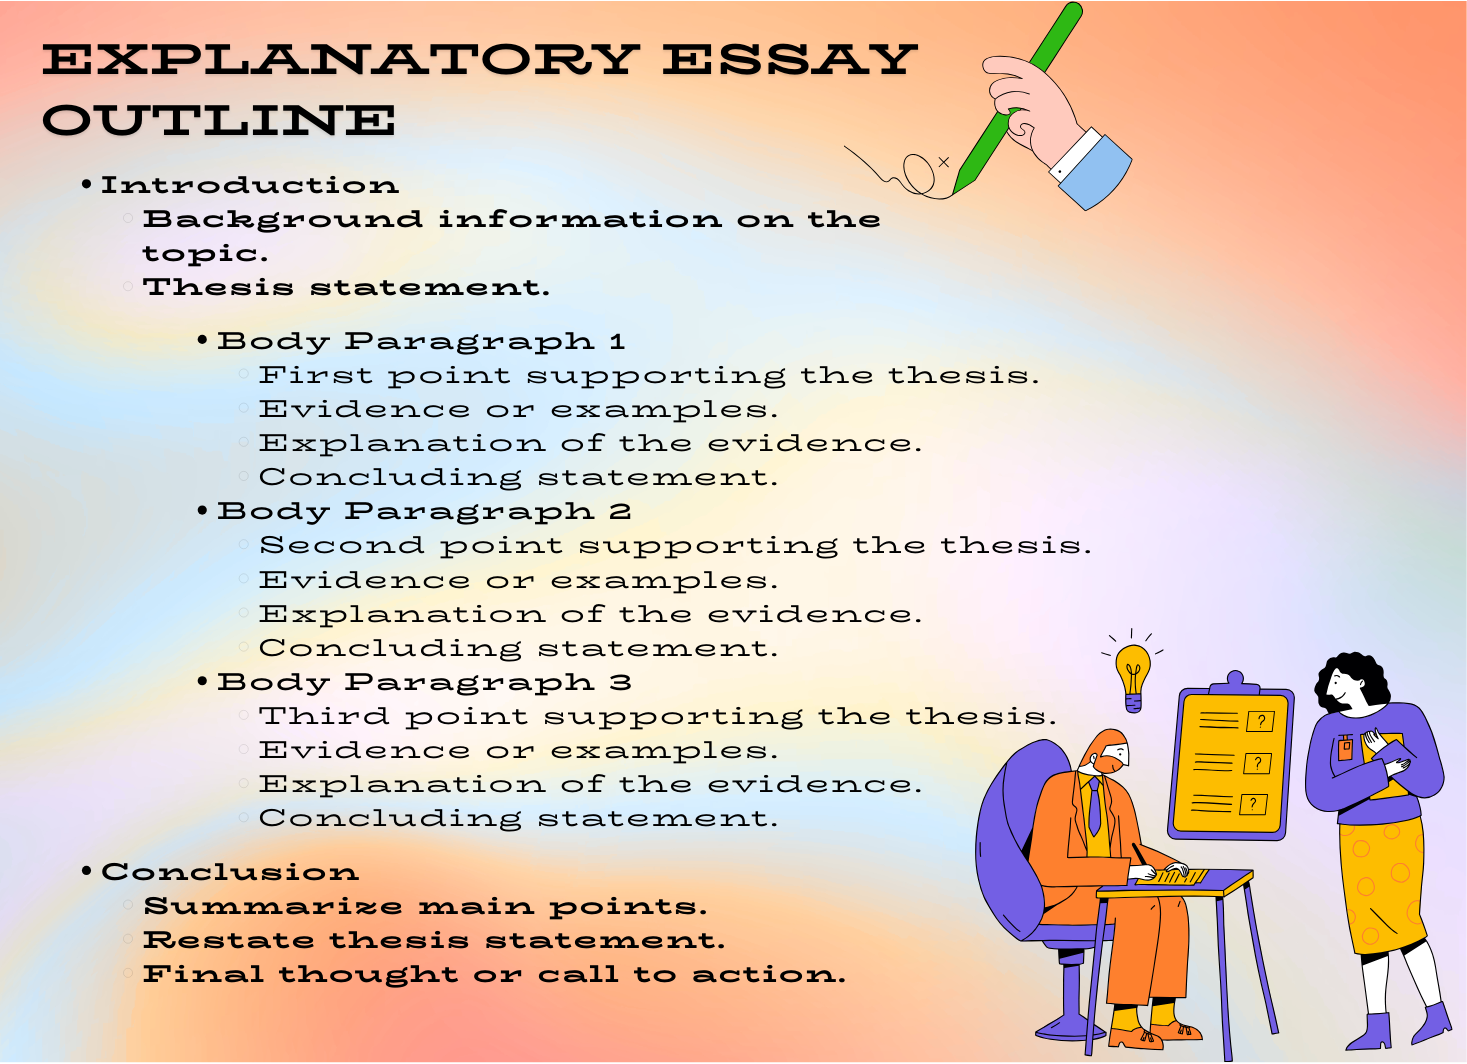 Example of an Outline: Introduction Background information on the topic. Thesis statement. Body Paragraph 1 First point supporting the thesis statement. Evidence or examples to support this point. Explanation of the evidence provided. Concluding statement. Body Paragraph 2 Second point supporting the thesis statement. Evidence or examples to support this point. Explanation of the evidence provided. Concluding statement. Body Paragraph 3 Third point supporting the thesis statement. Evidence or examples to support this point. Explanation of the evidence provided. Concluding statement. Conclusion Summarize main points. Restate thesis statement. Call to action or future implications.